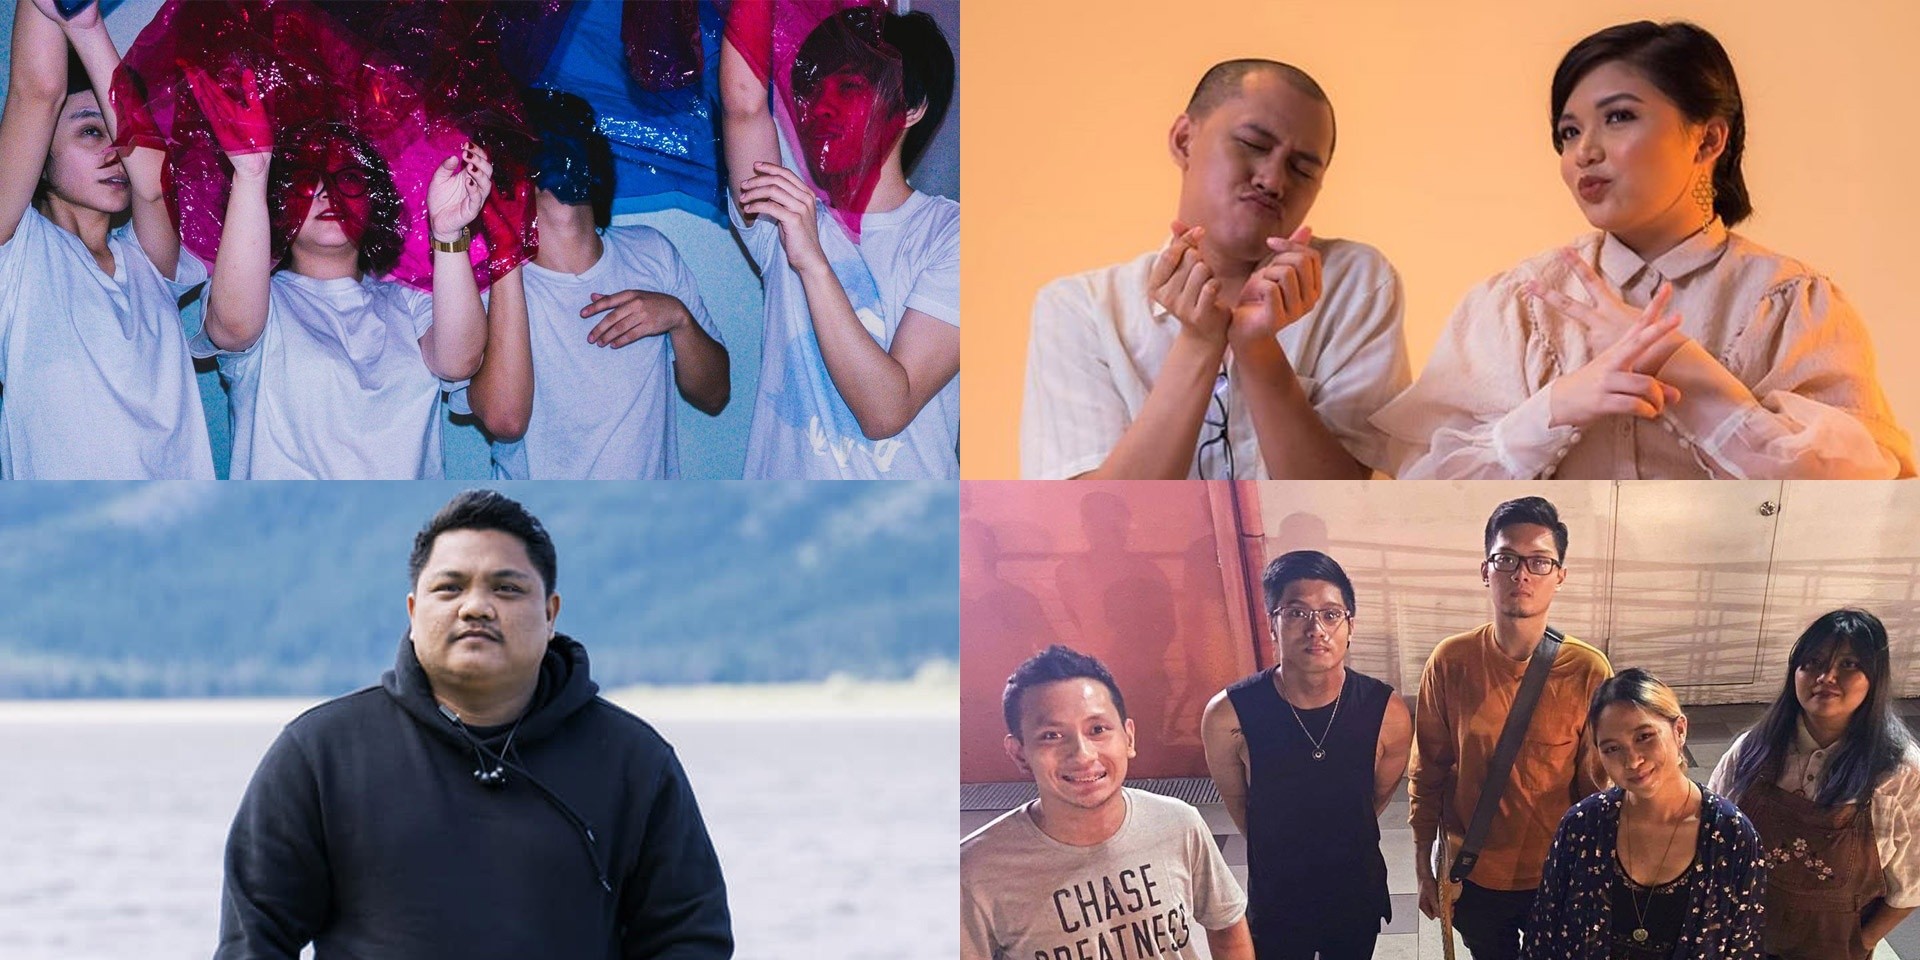 The Buildings, Route 83, Jet Danao, The Vowels They Orbit, and more release new music – listen